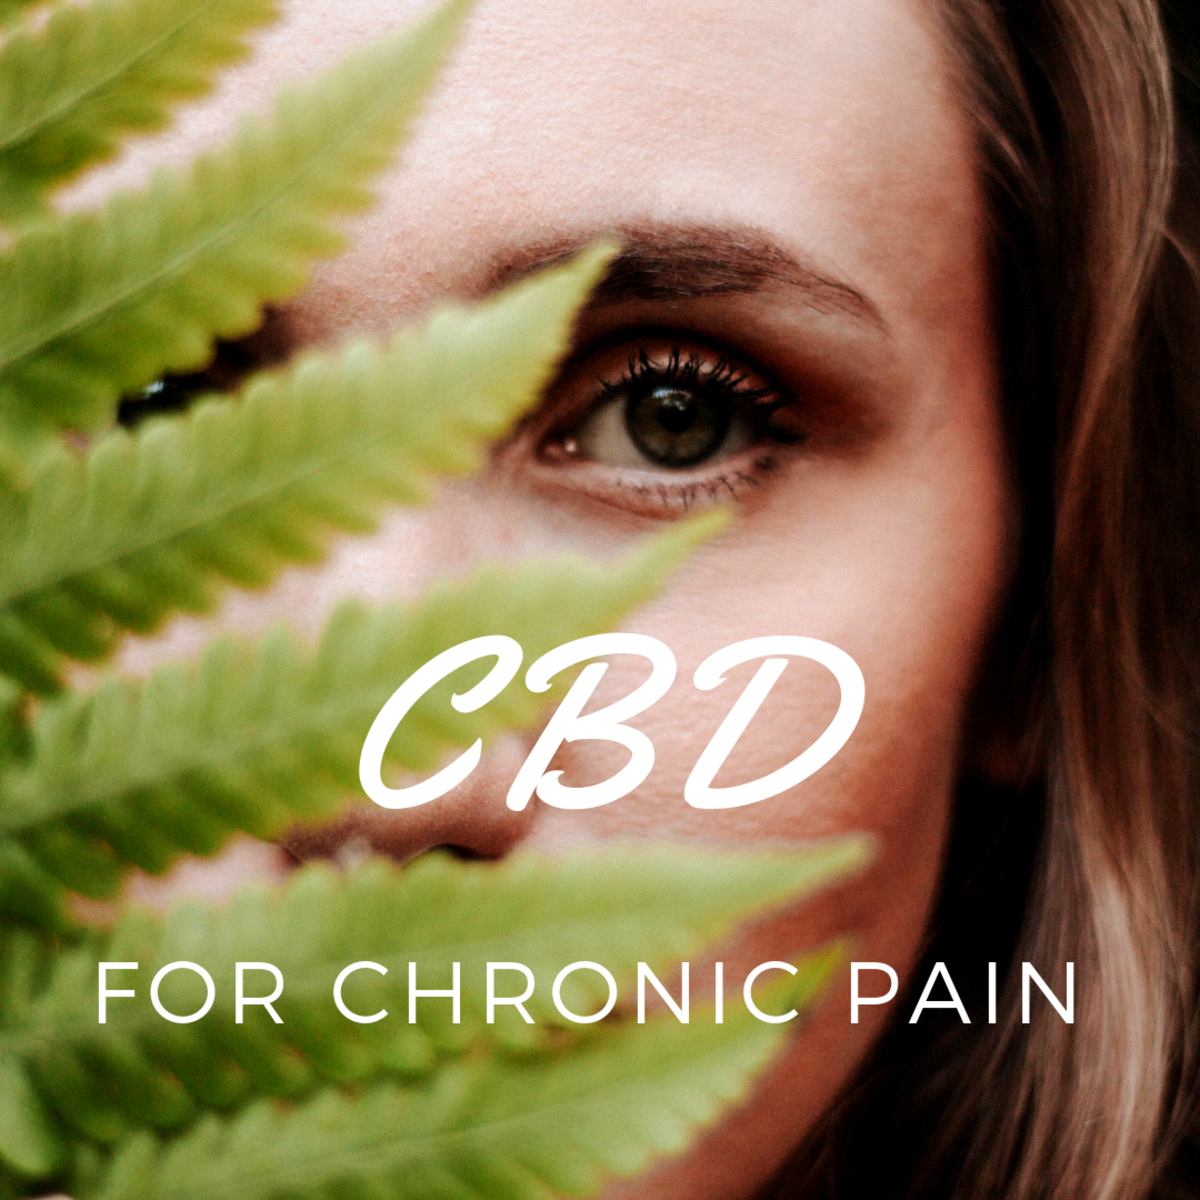 I found that CBD can help relieve my chronic pain with no noticeable side effects.